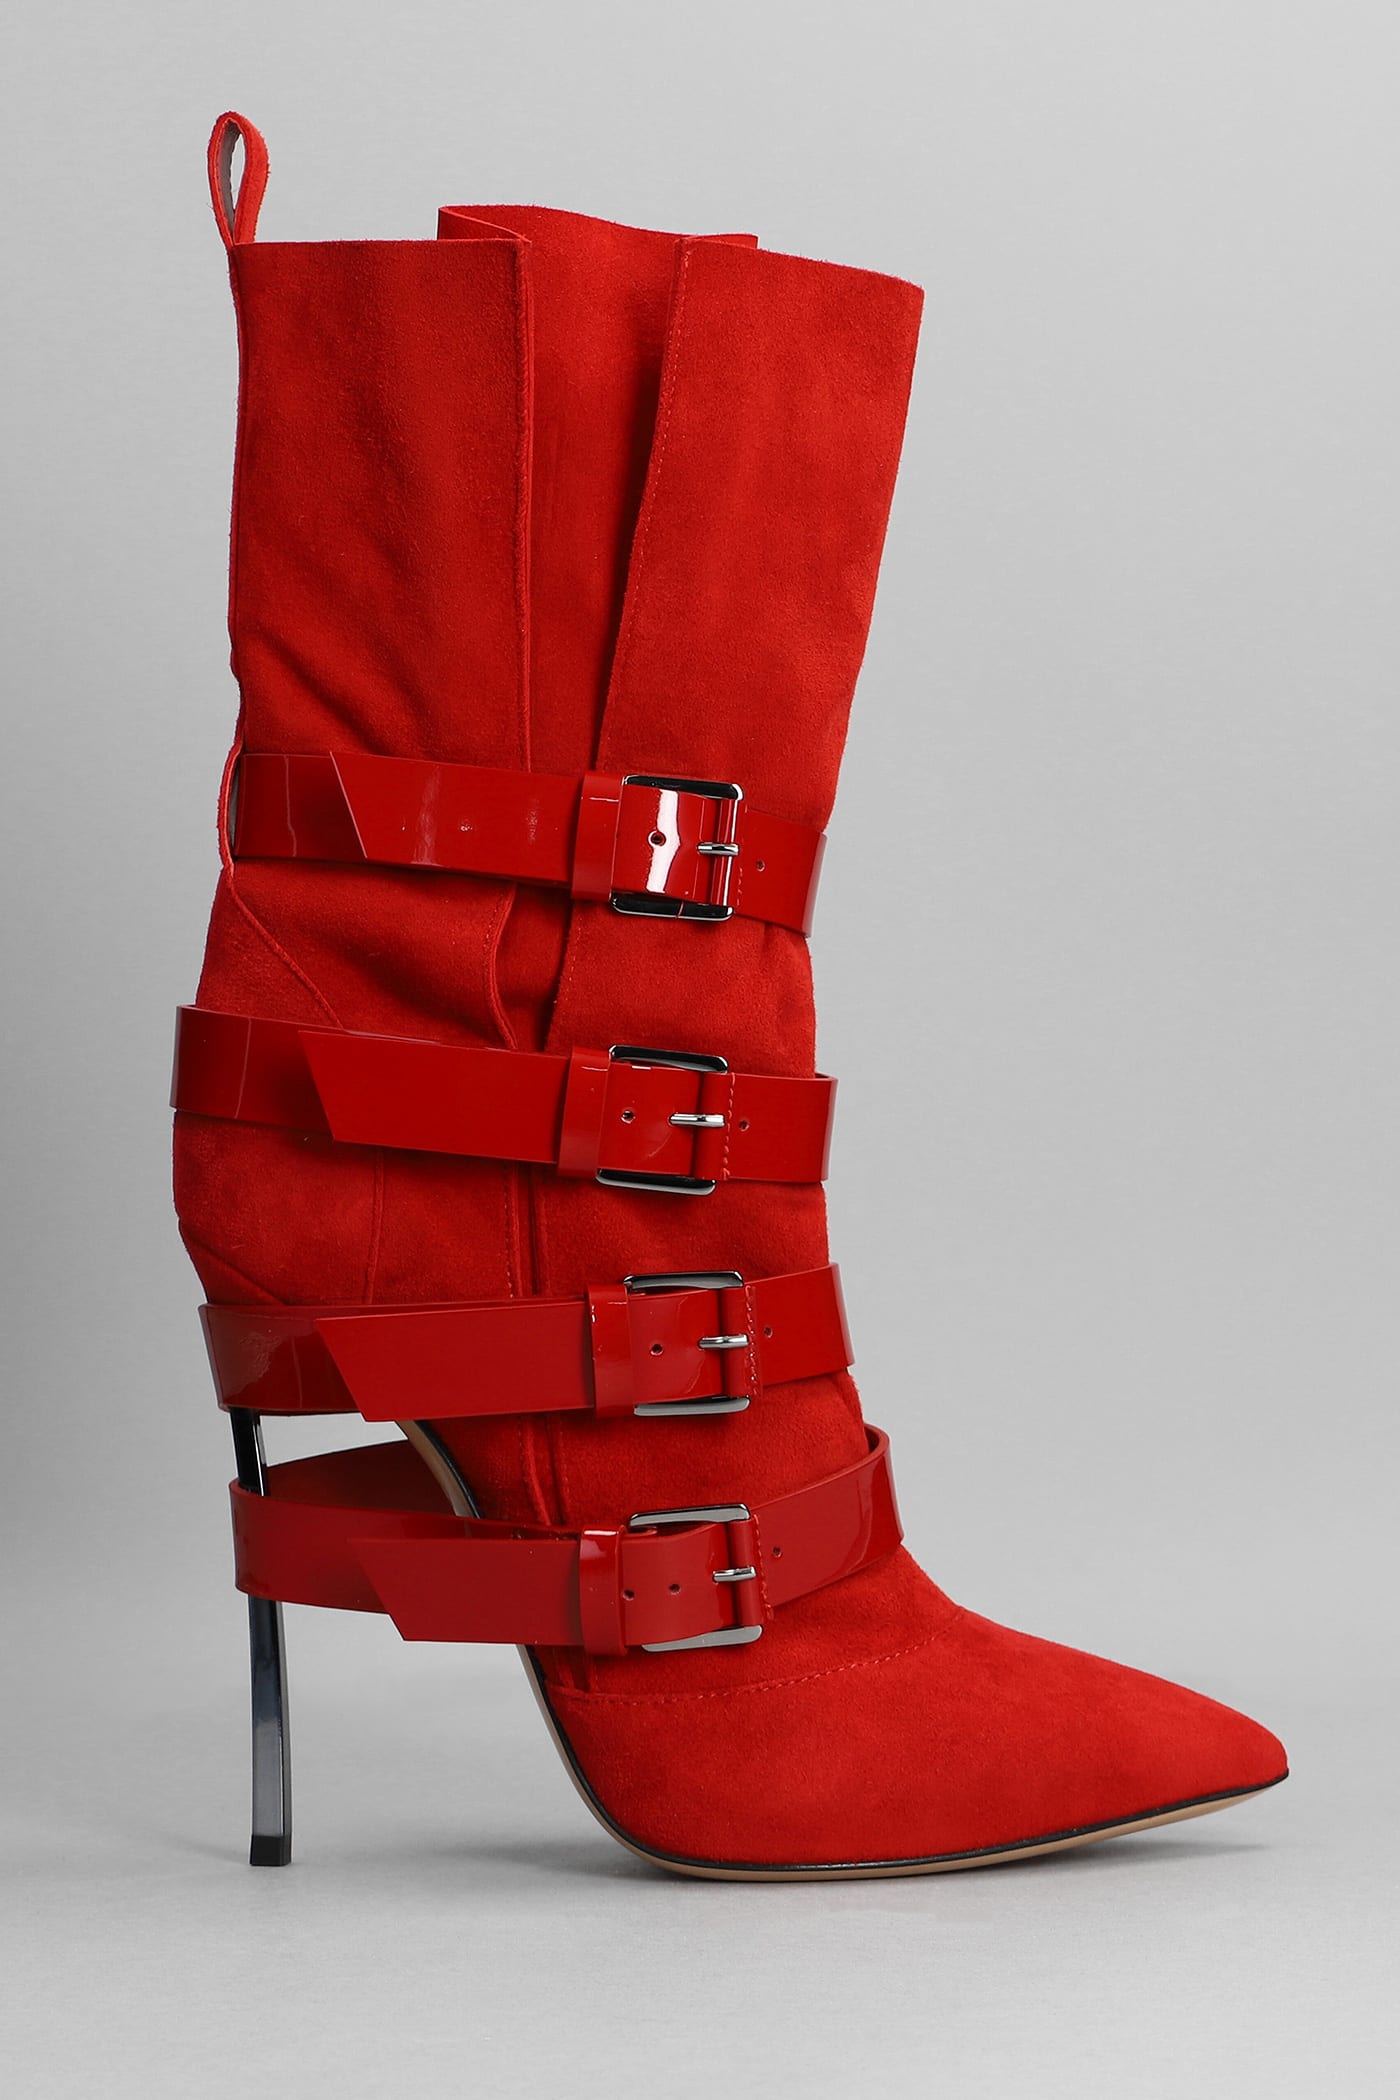 Casadei Blade Kinky High Heels Ankle Boots In Red Suede